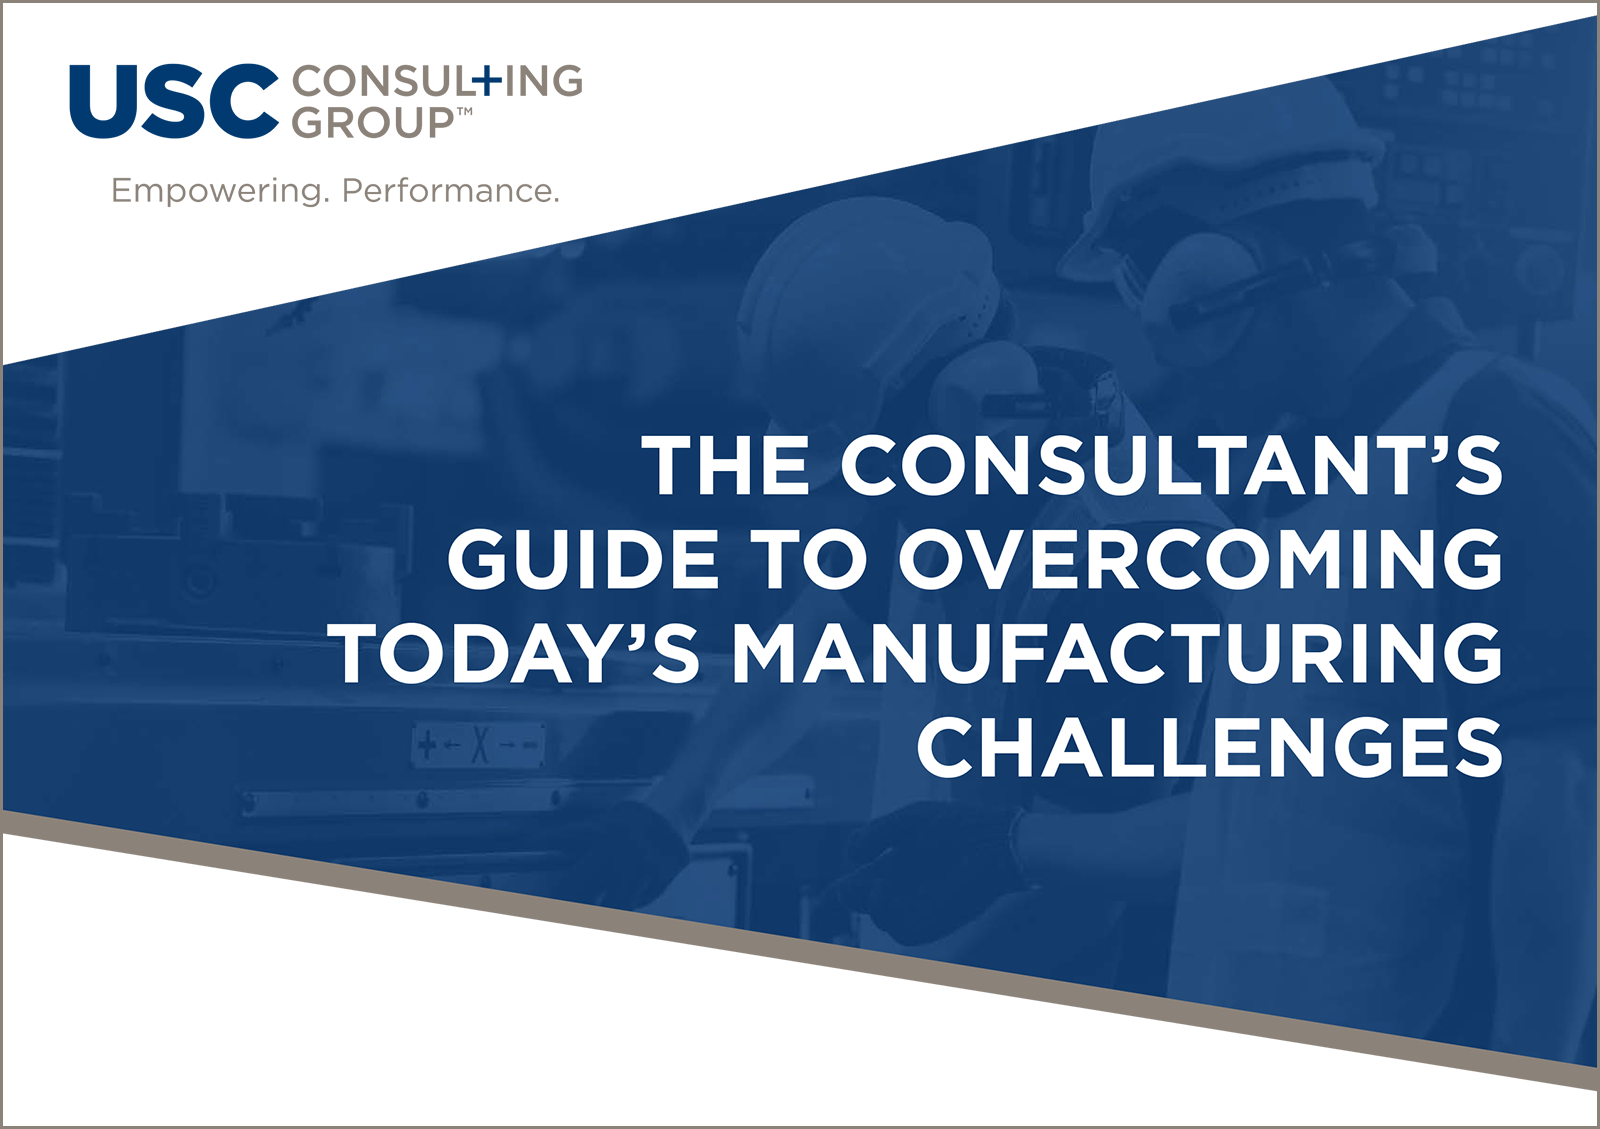 The Consultants Guide to Overcoming Todays Manufacturing Challenges feature image